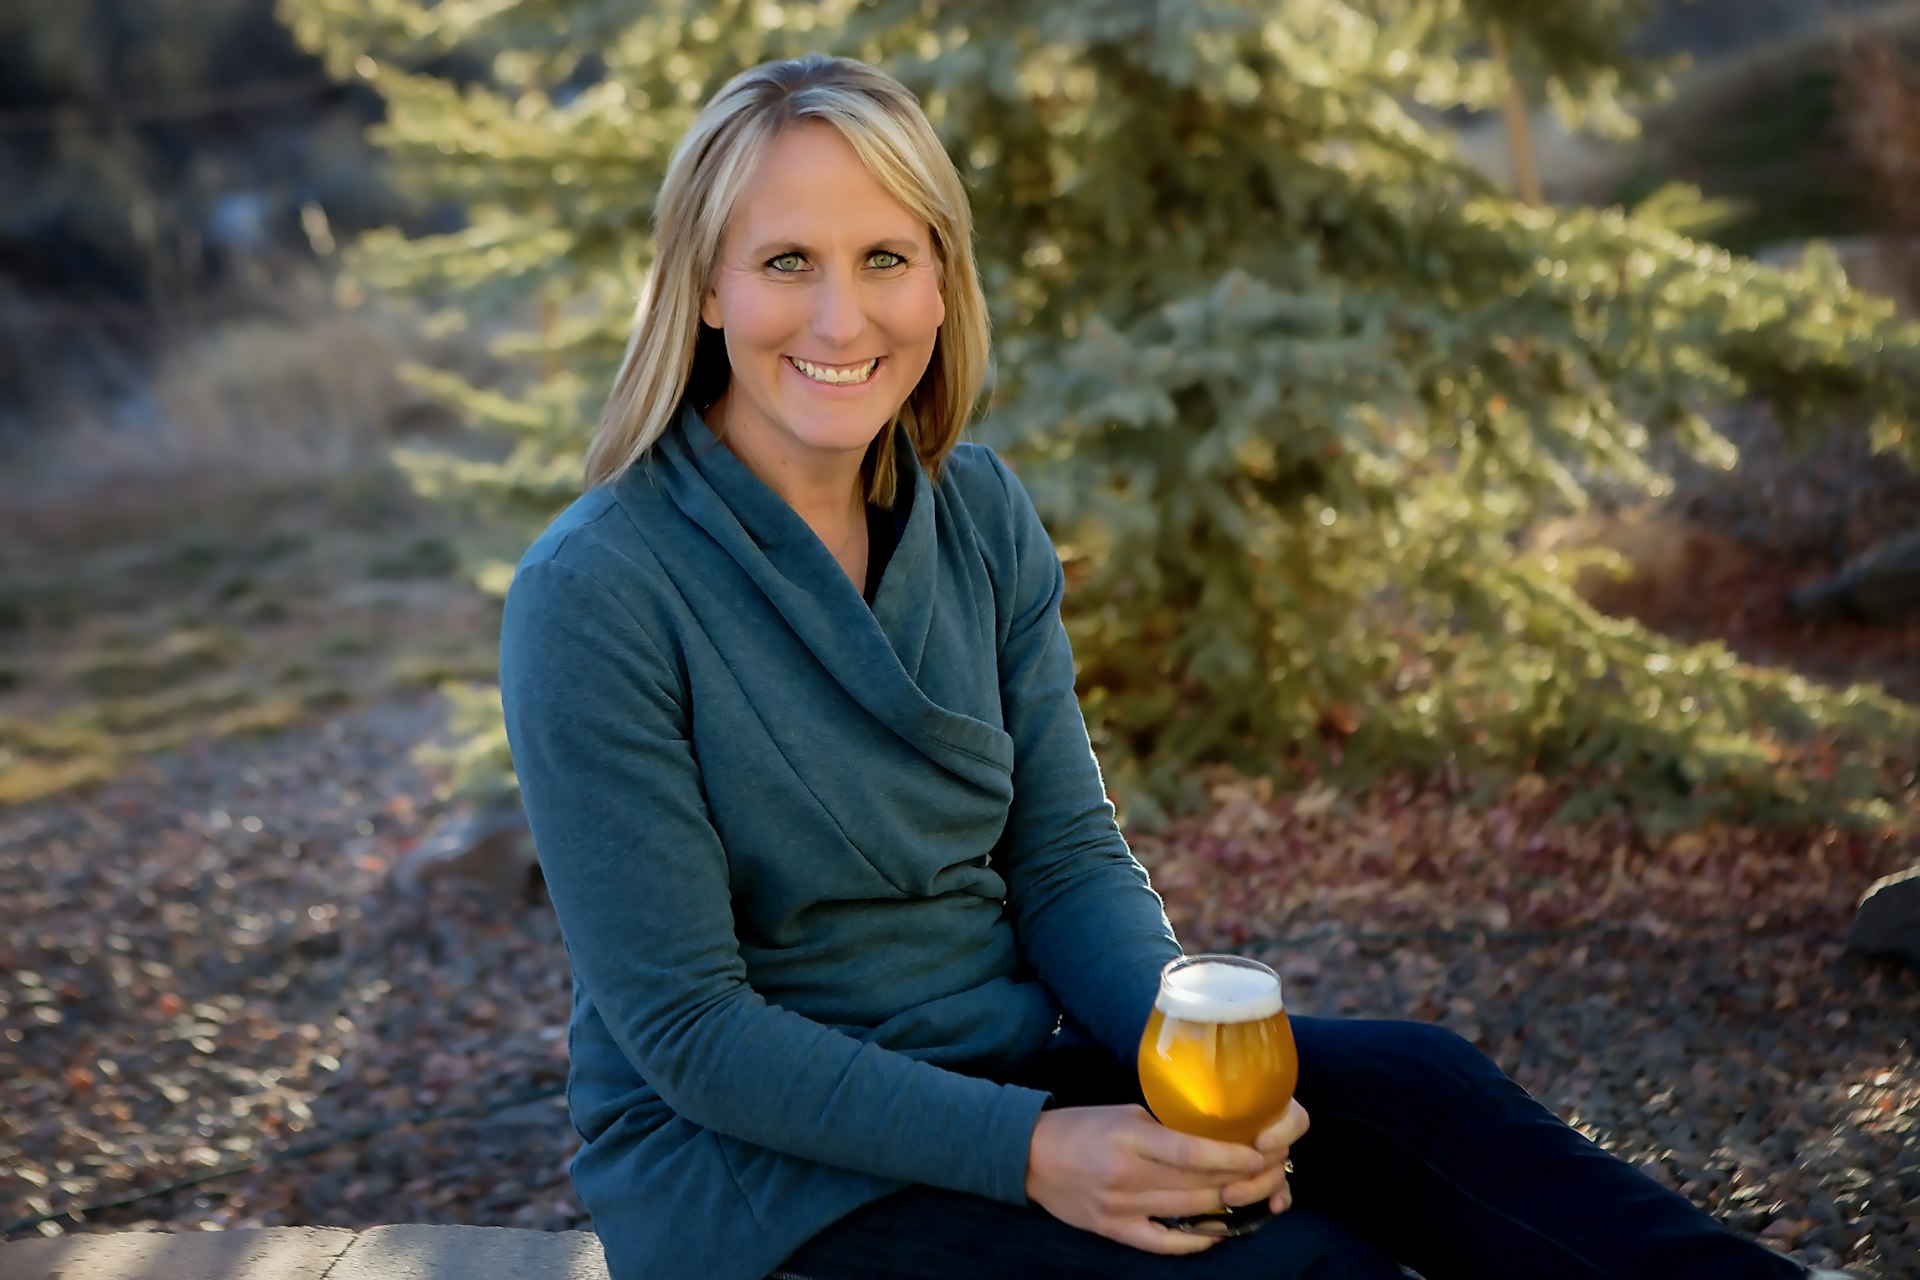 A woman sits outside holding a golden beer